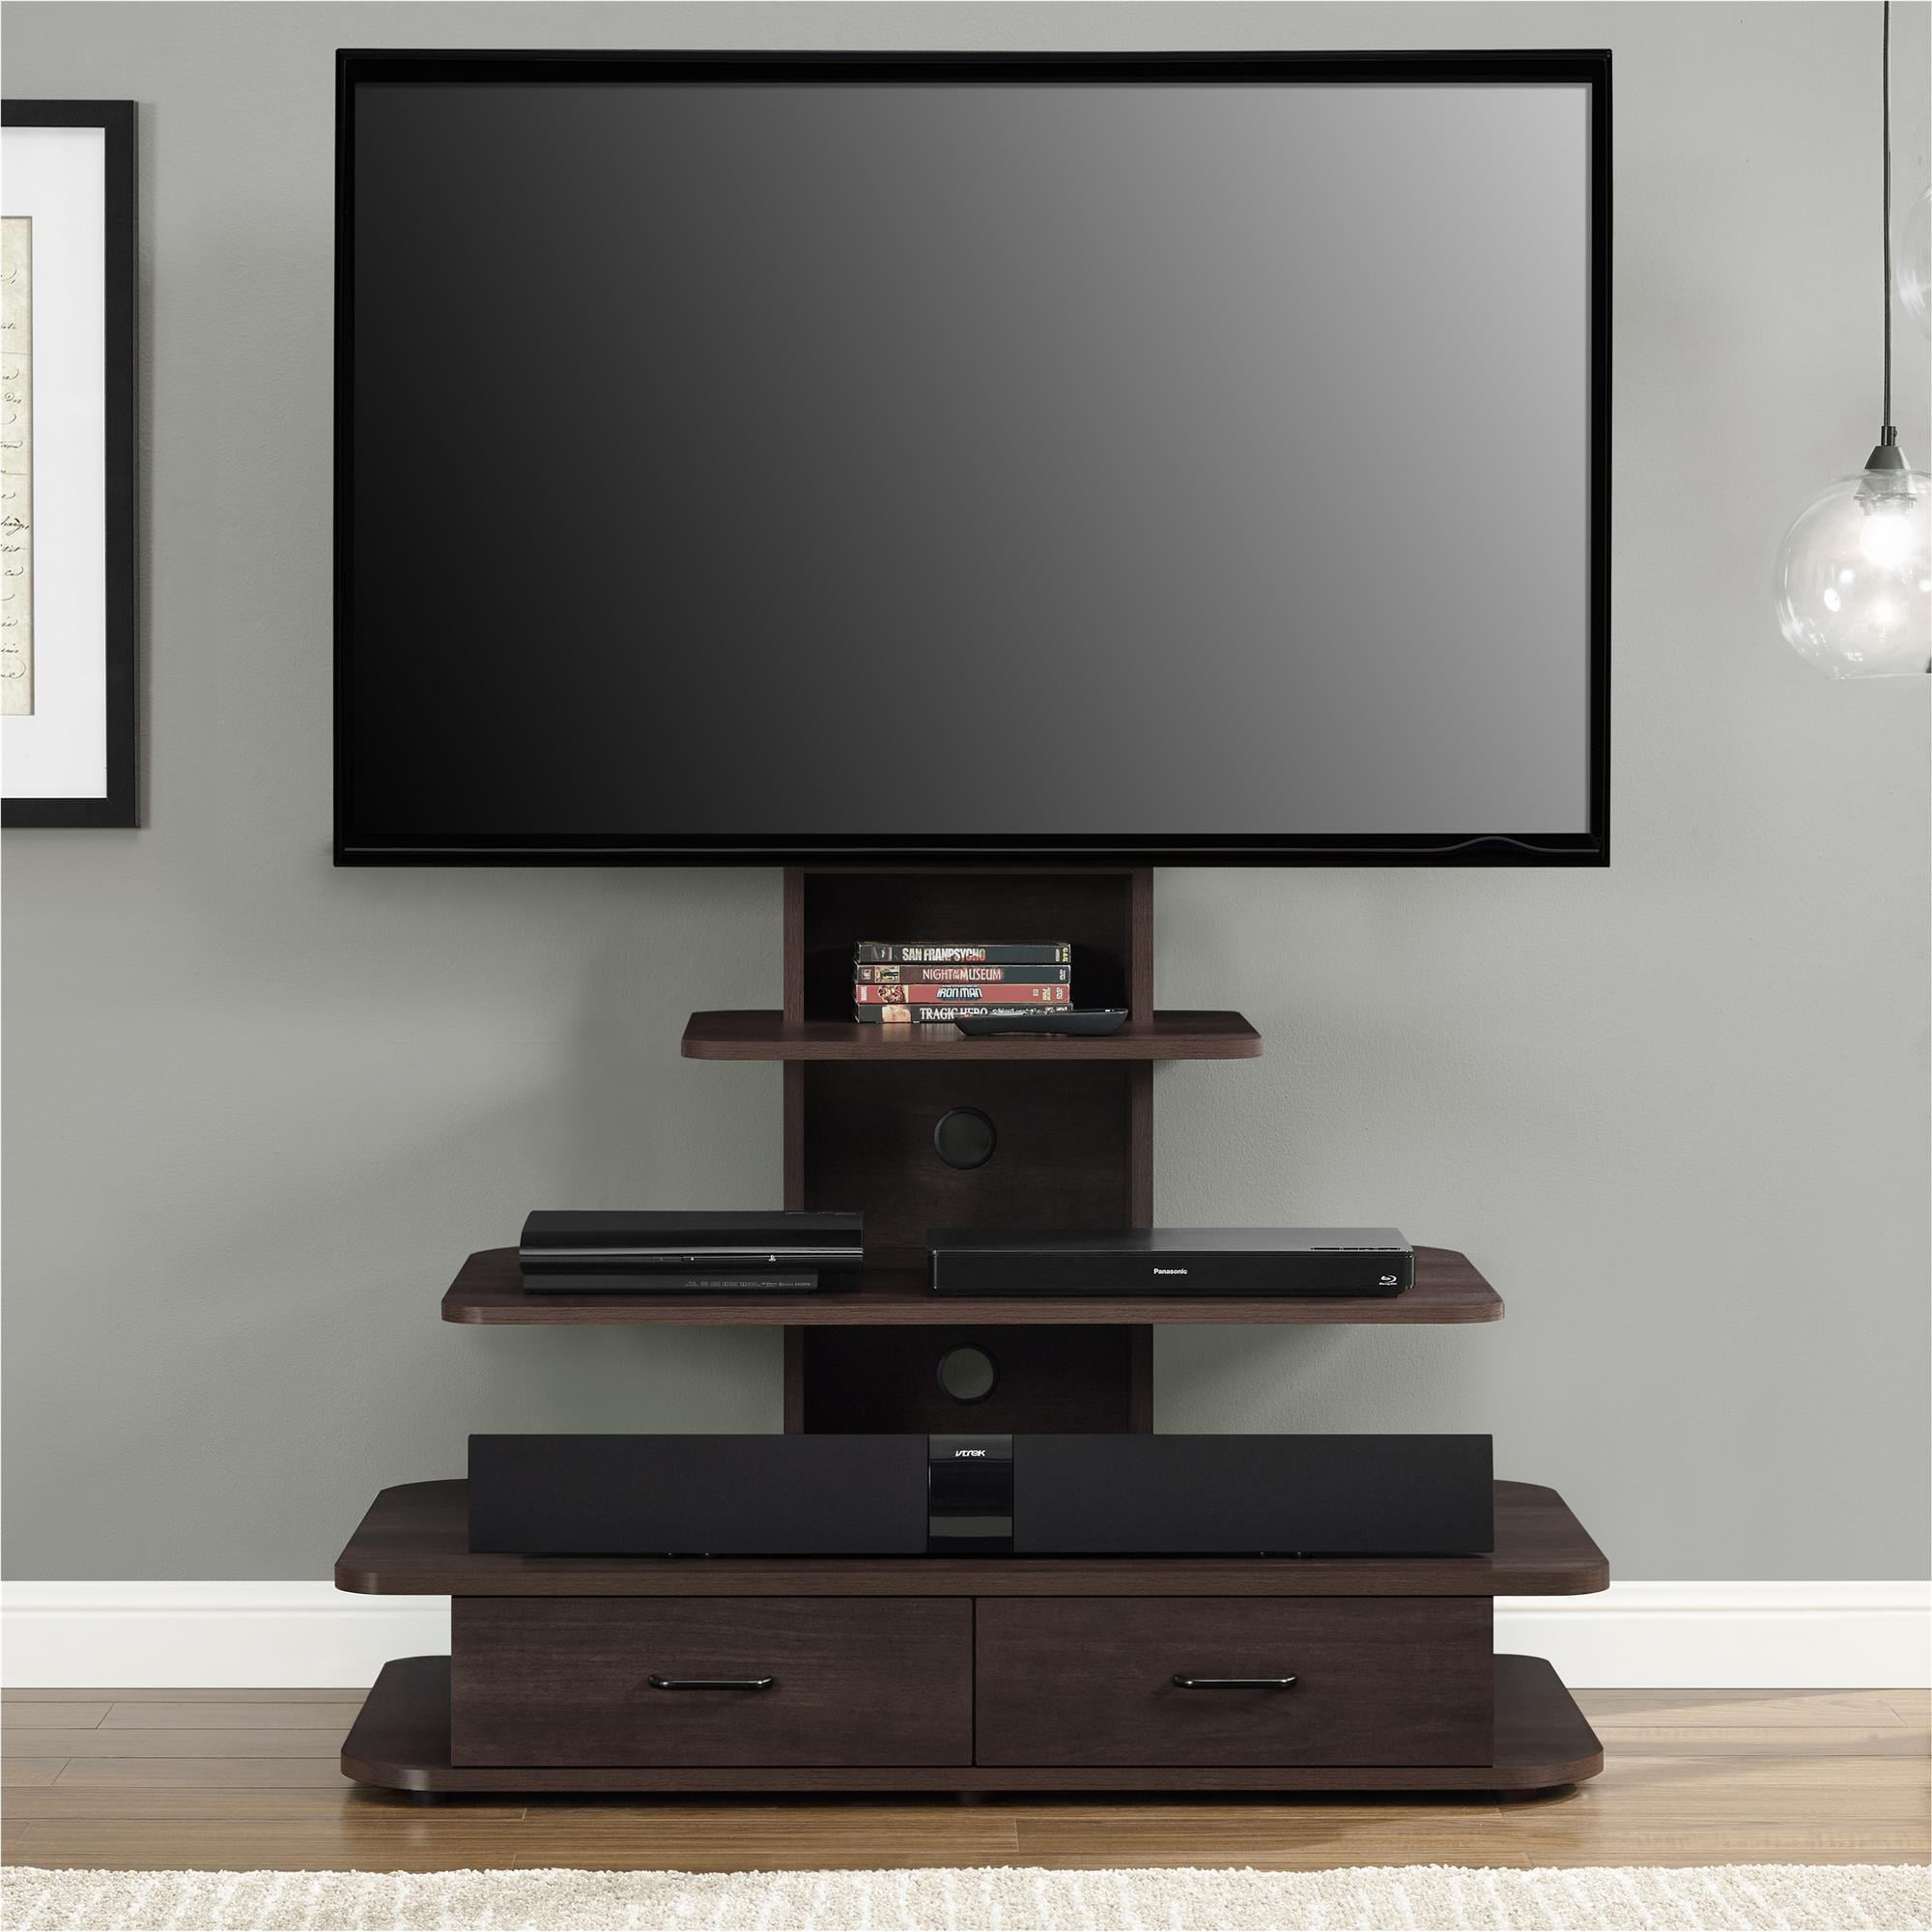 Ameriwood Home Transitional Tv Stand For Tvs Up To 55 Multiple Colors Walmart Com Walmart Com